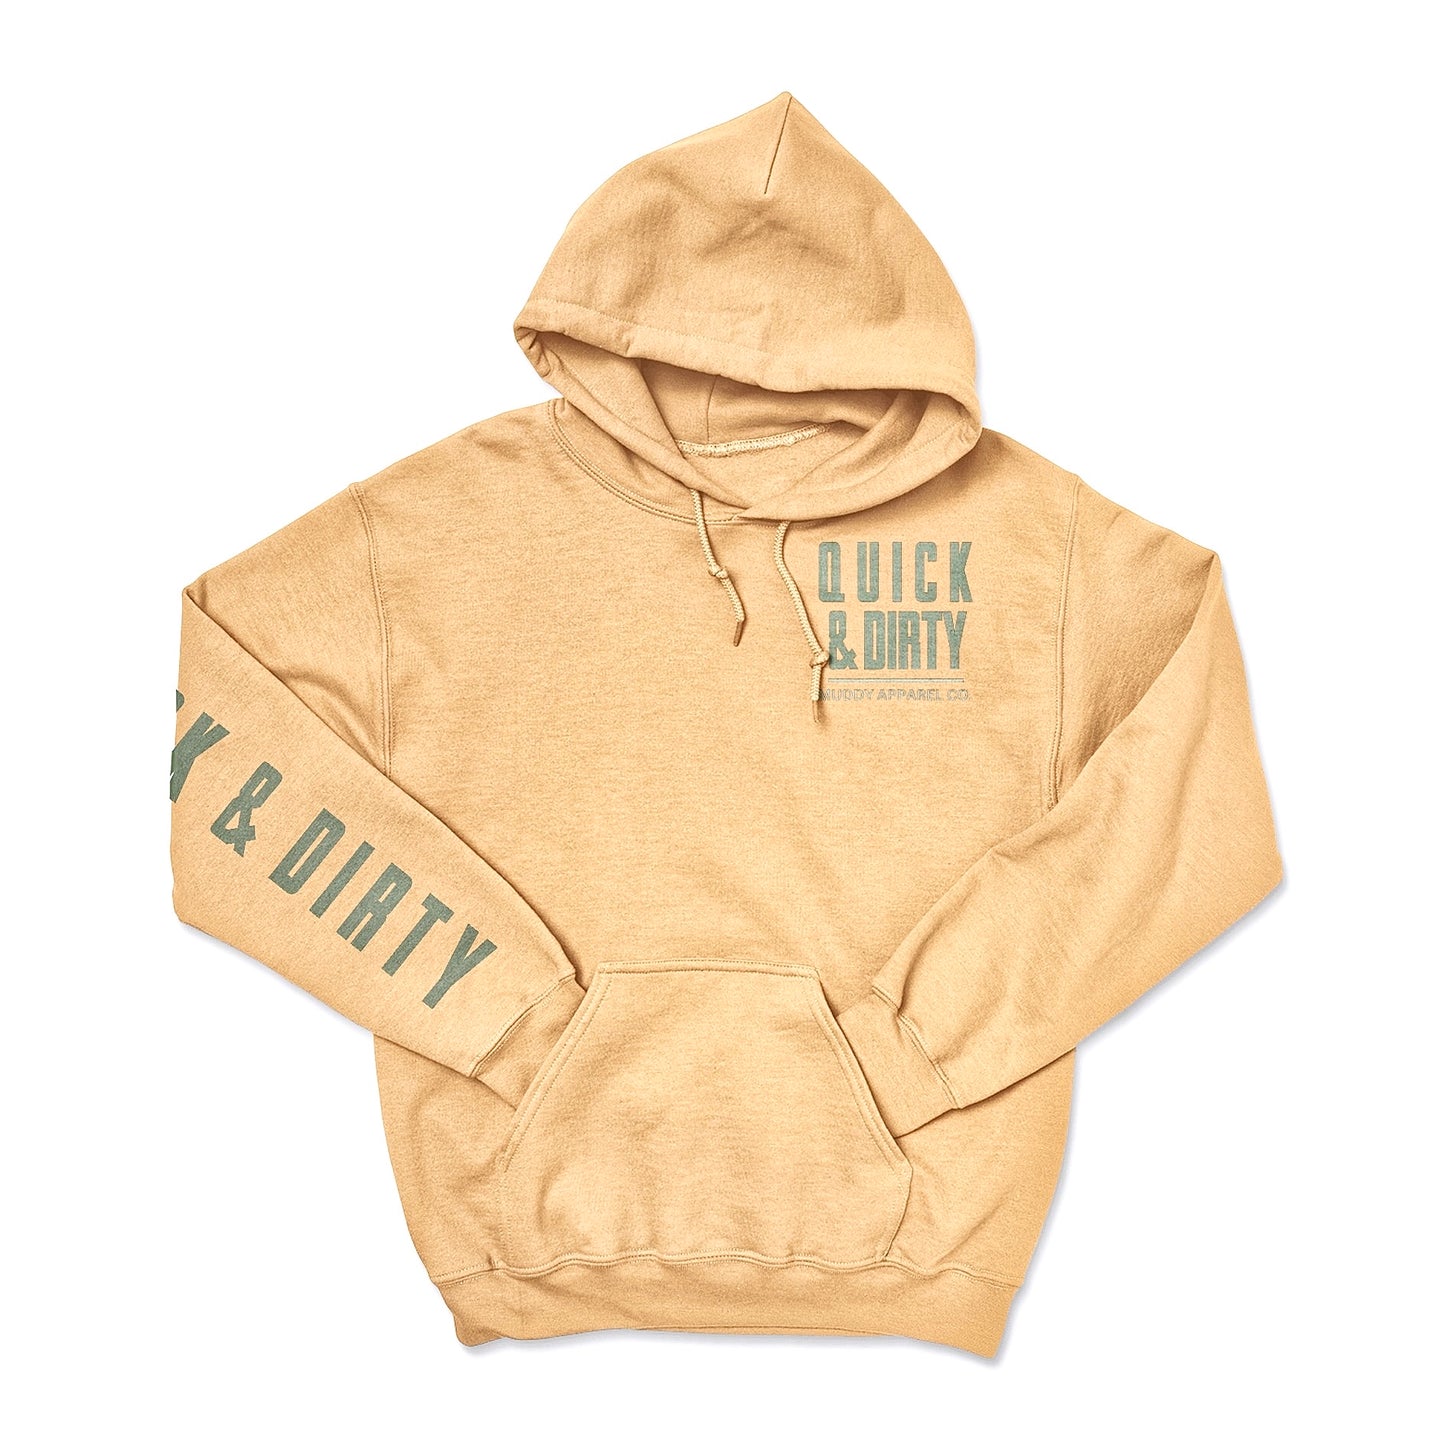 QUICK & DIRTY - OLD GOLD W/ SAGE PREMIUM HOODIE